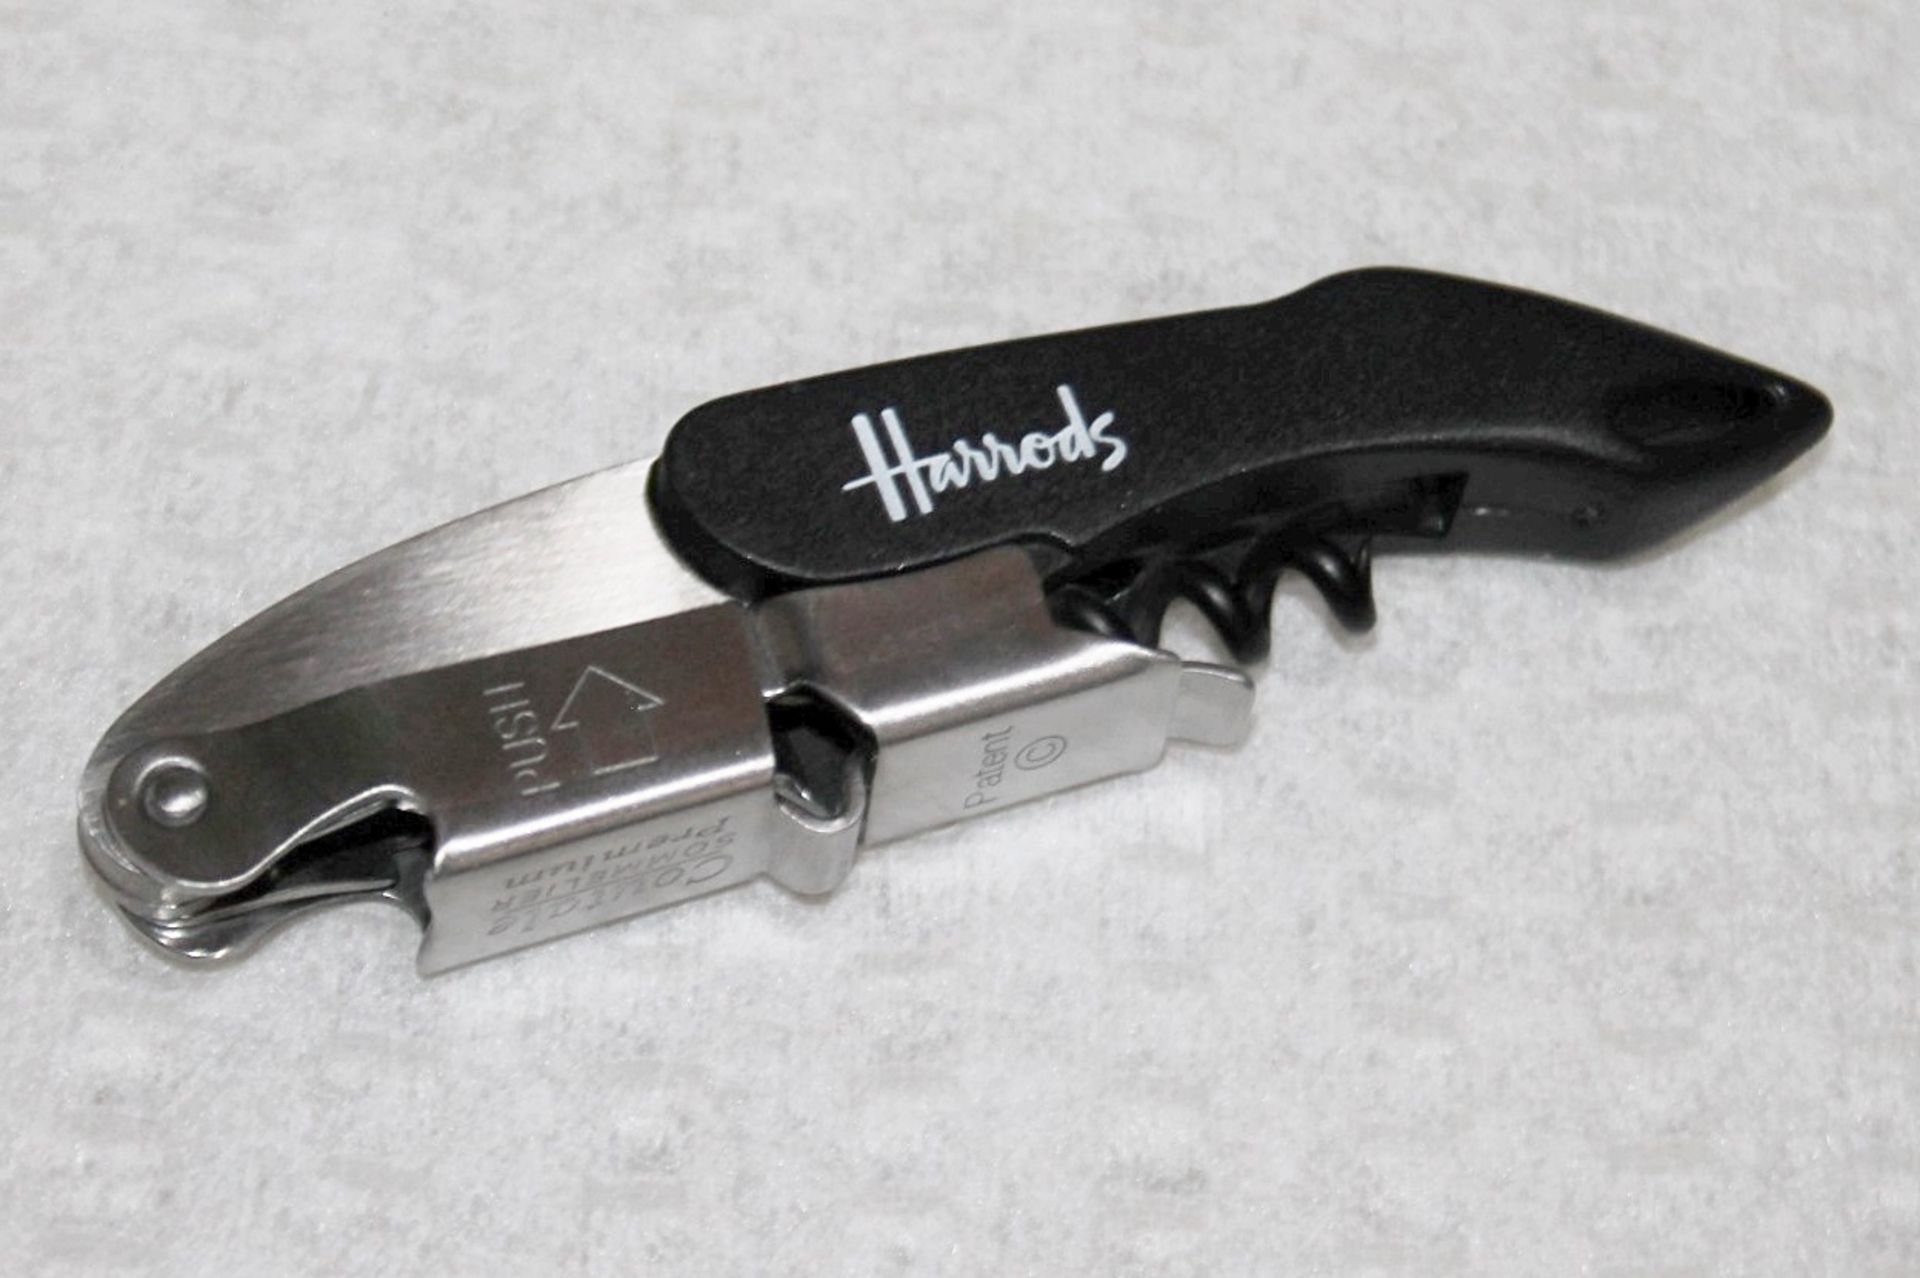 1 x COUTALE Premium Waiters Corkscrew And Wine Bottle Opener, With 'Famous' Branding - Original - Image 5 of 6